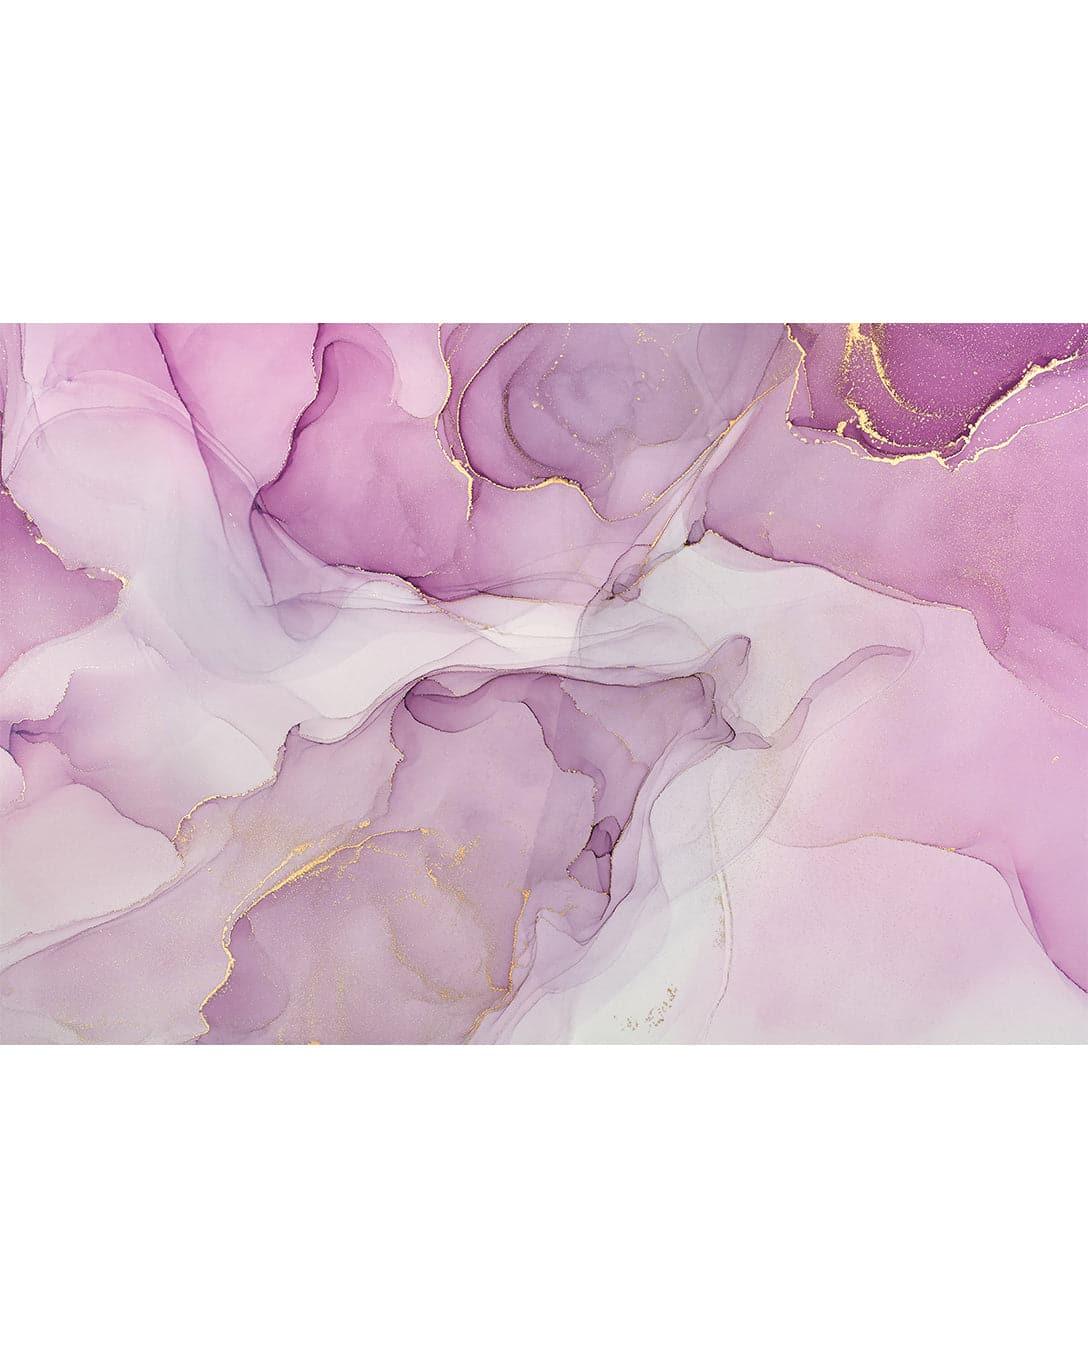 Watercolor Marble Abstract Alcohol Ink Pink White Paint Wall Mural Watercolor Marble Abstract Alcohol Ink Pink White Paint Wall Mural 